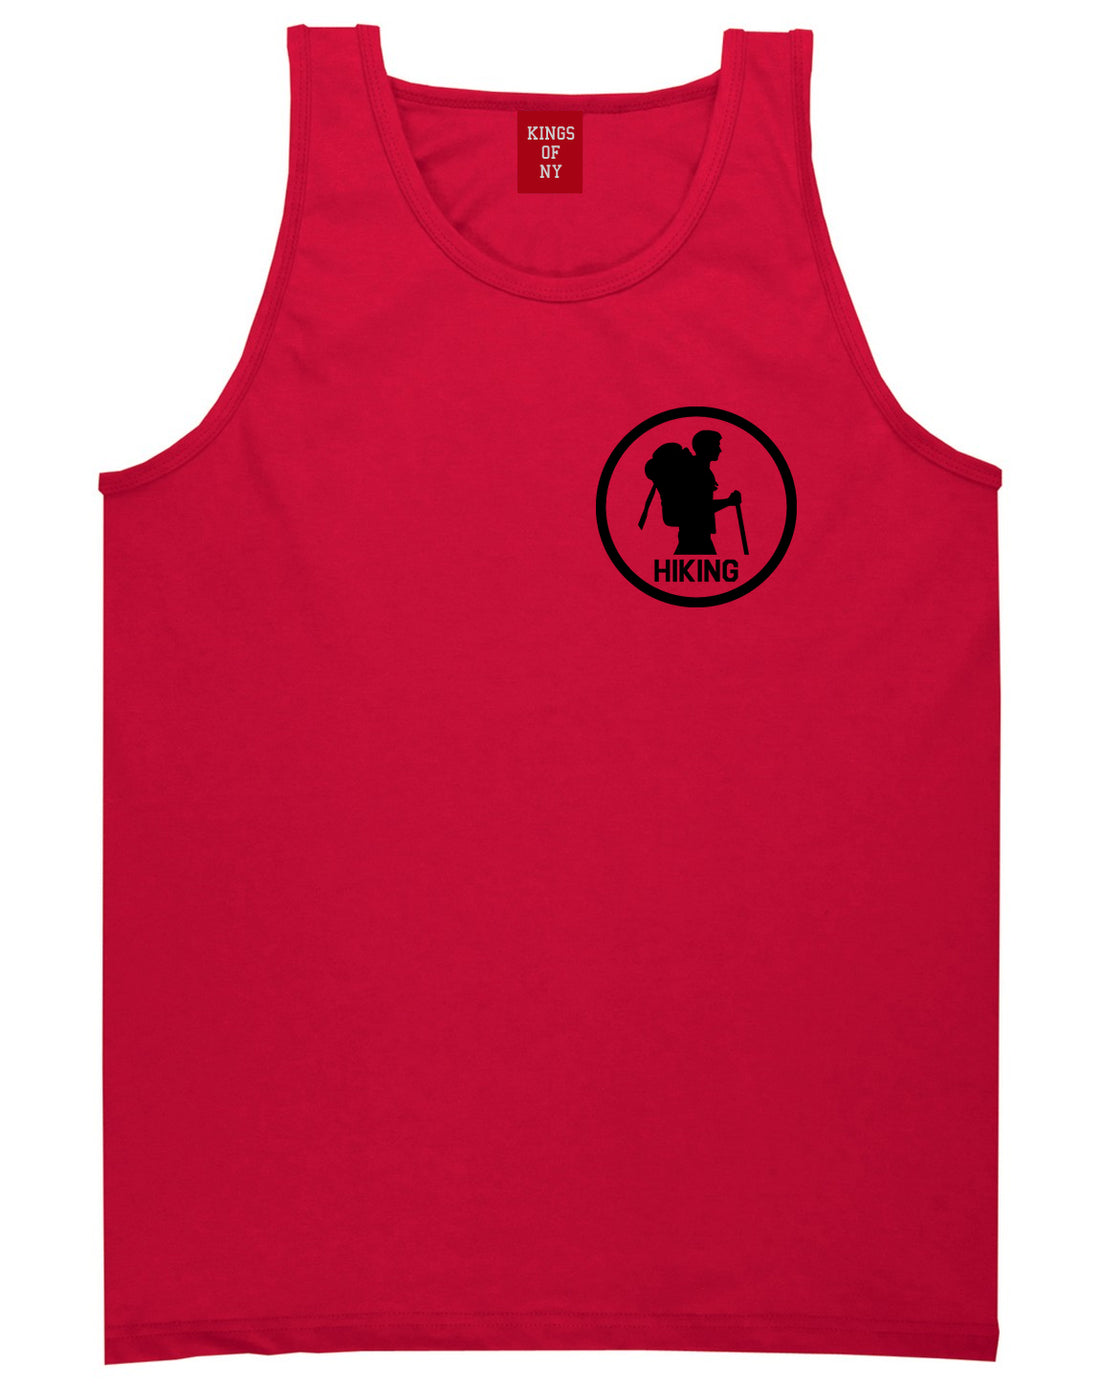 Backpacking Outdoor Hiking Chest Red Tank Top Shirt by Kings Of NY